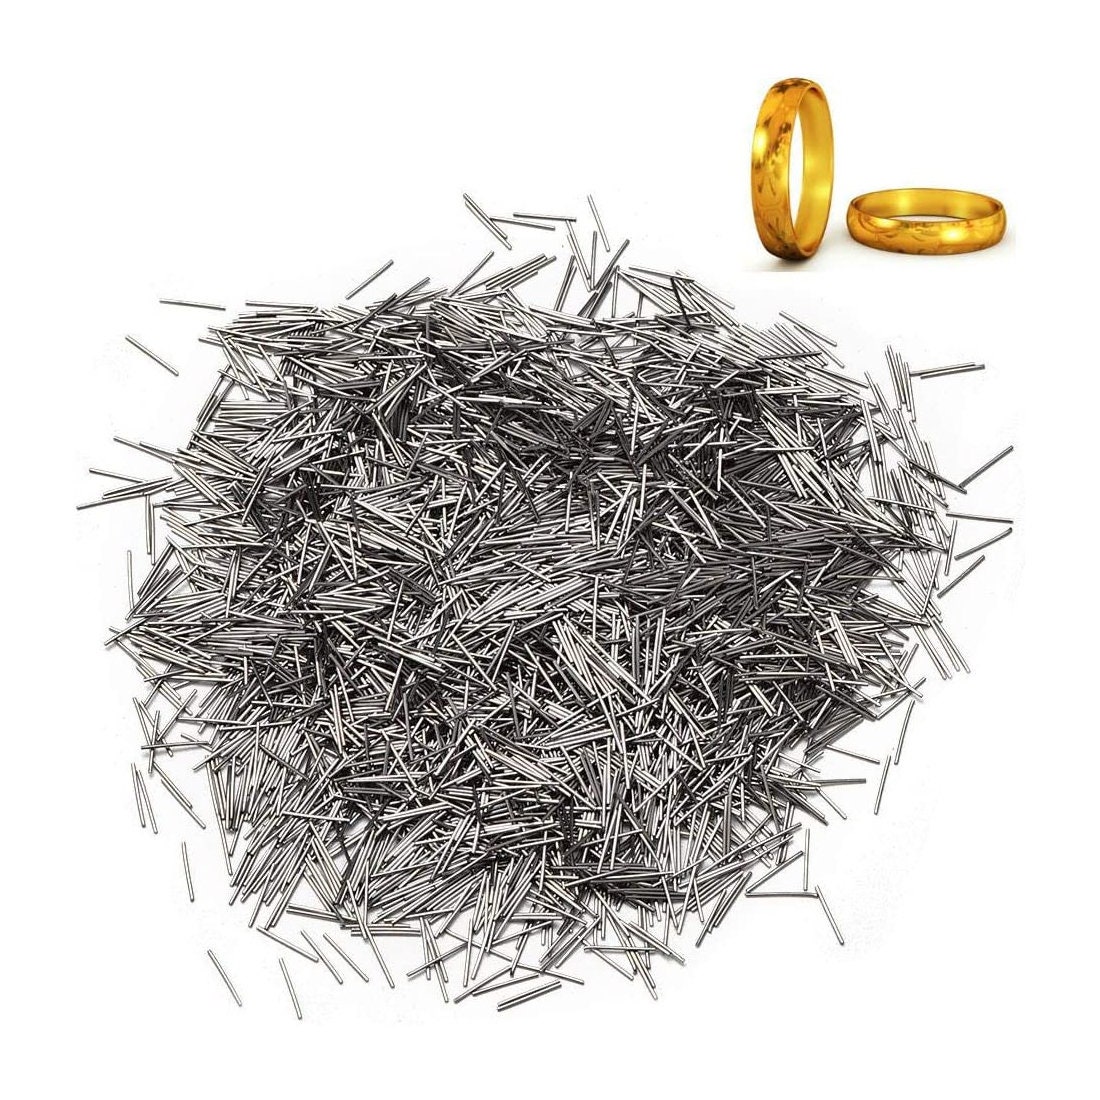 47.660 = TUMBLING MEDIA STAINLESS STEEL PINS 0.5mm FOR MAGNETIC